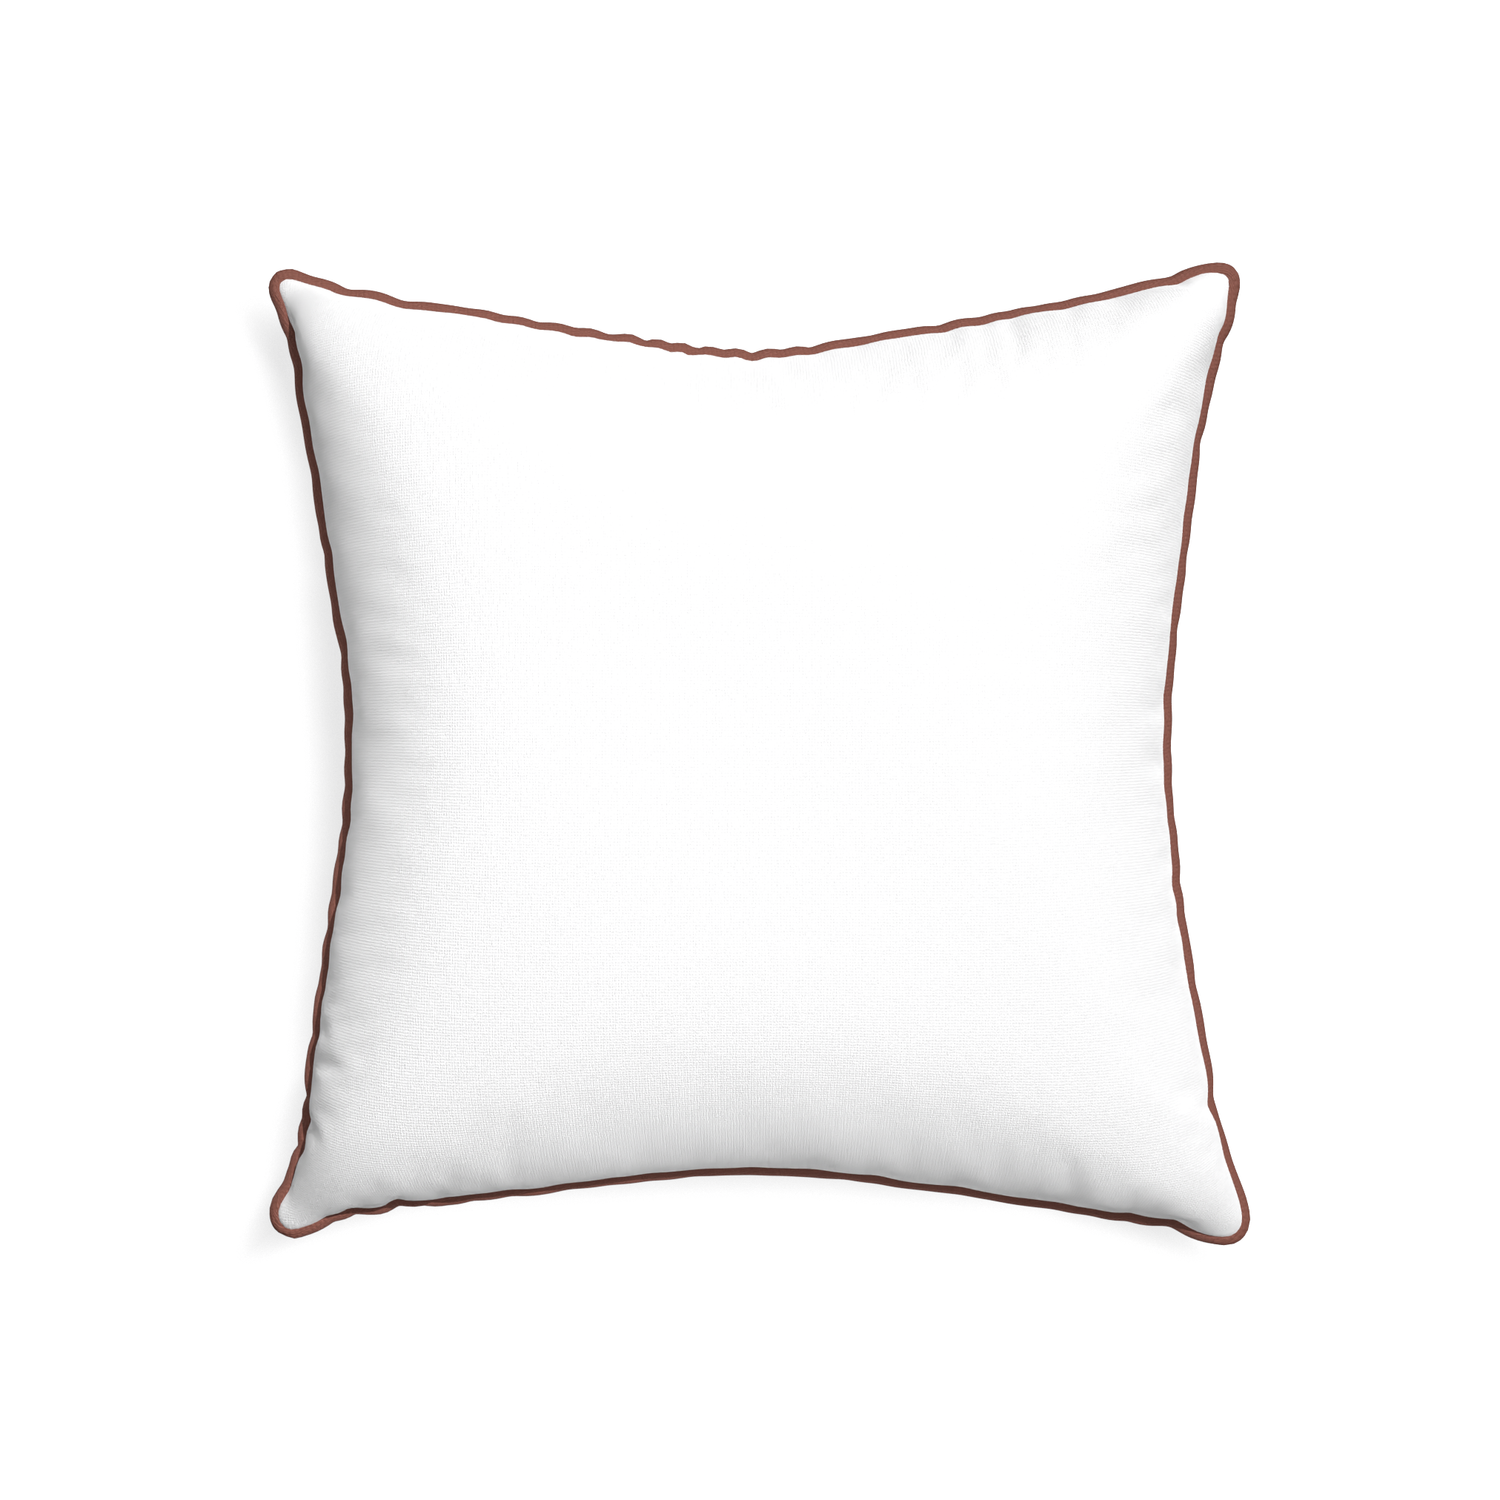 22-square snow custom pillow with w piping on white background